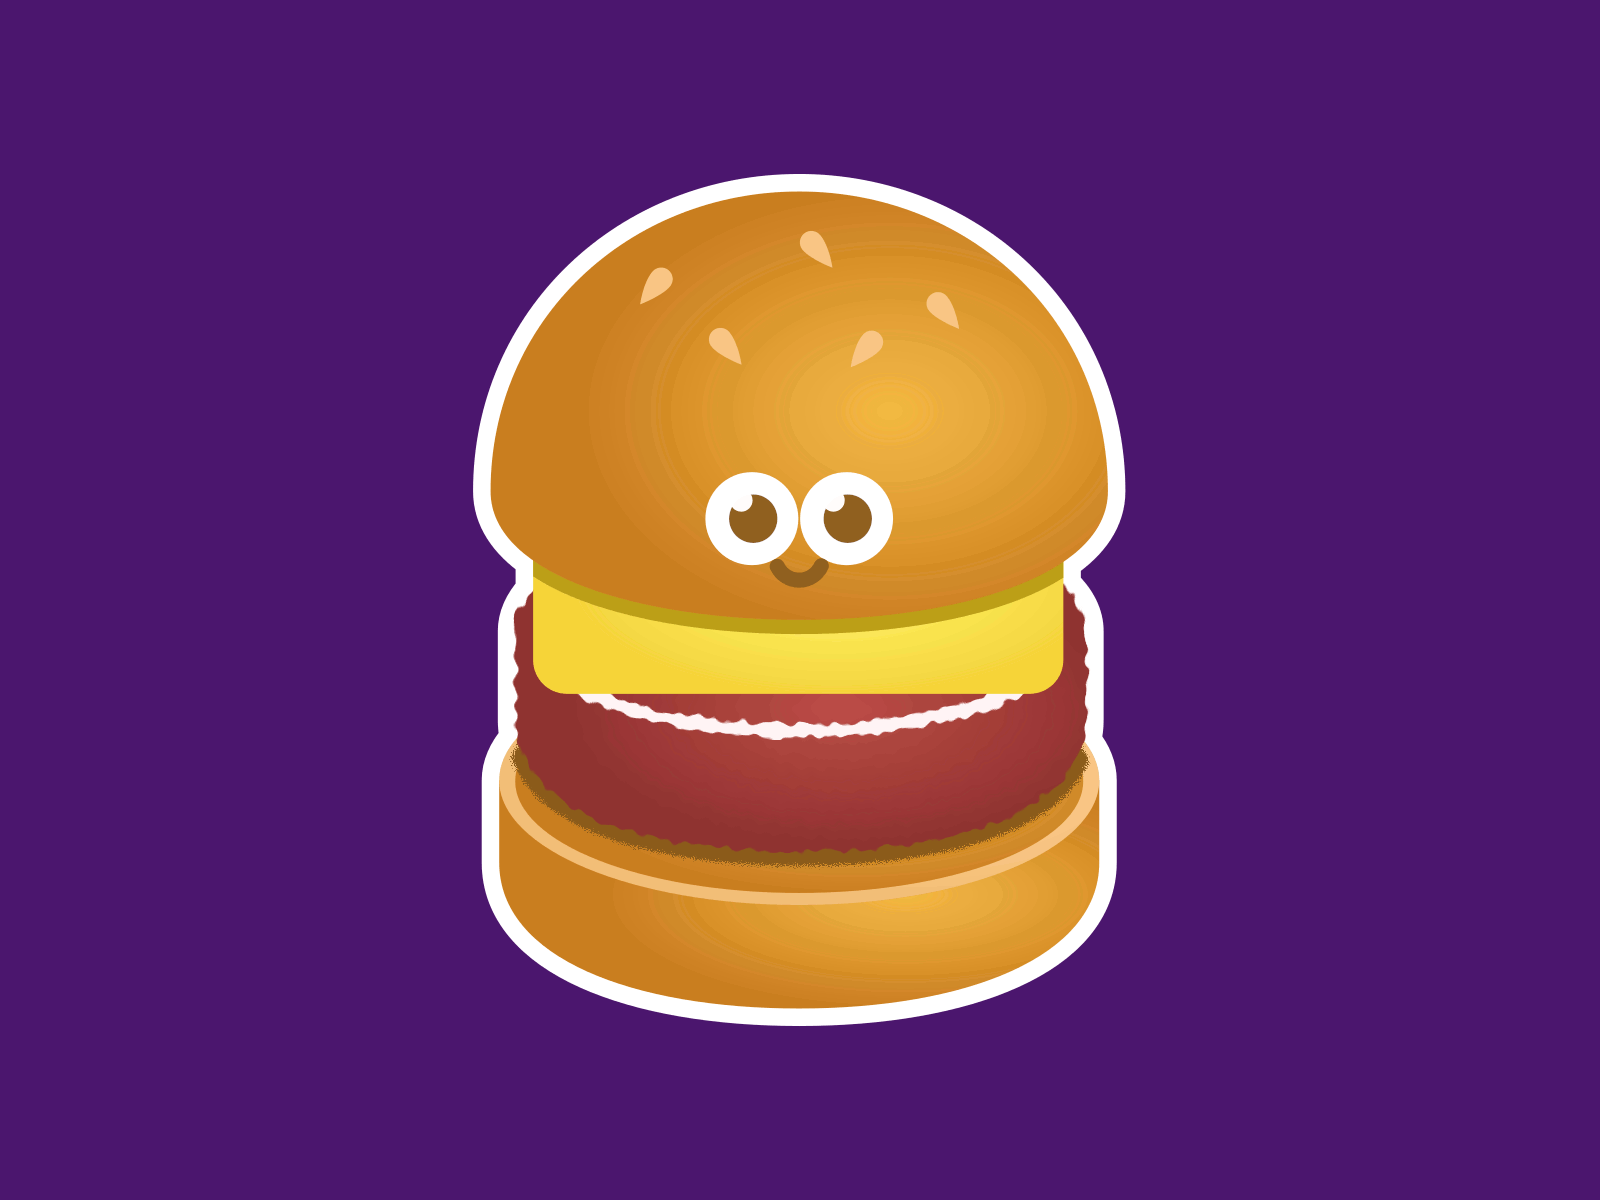 Look over there, Burger burger character design cute illustration vector art